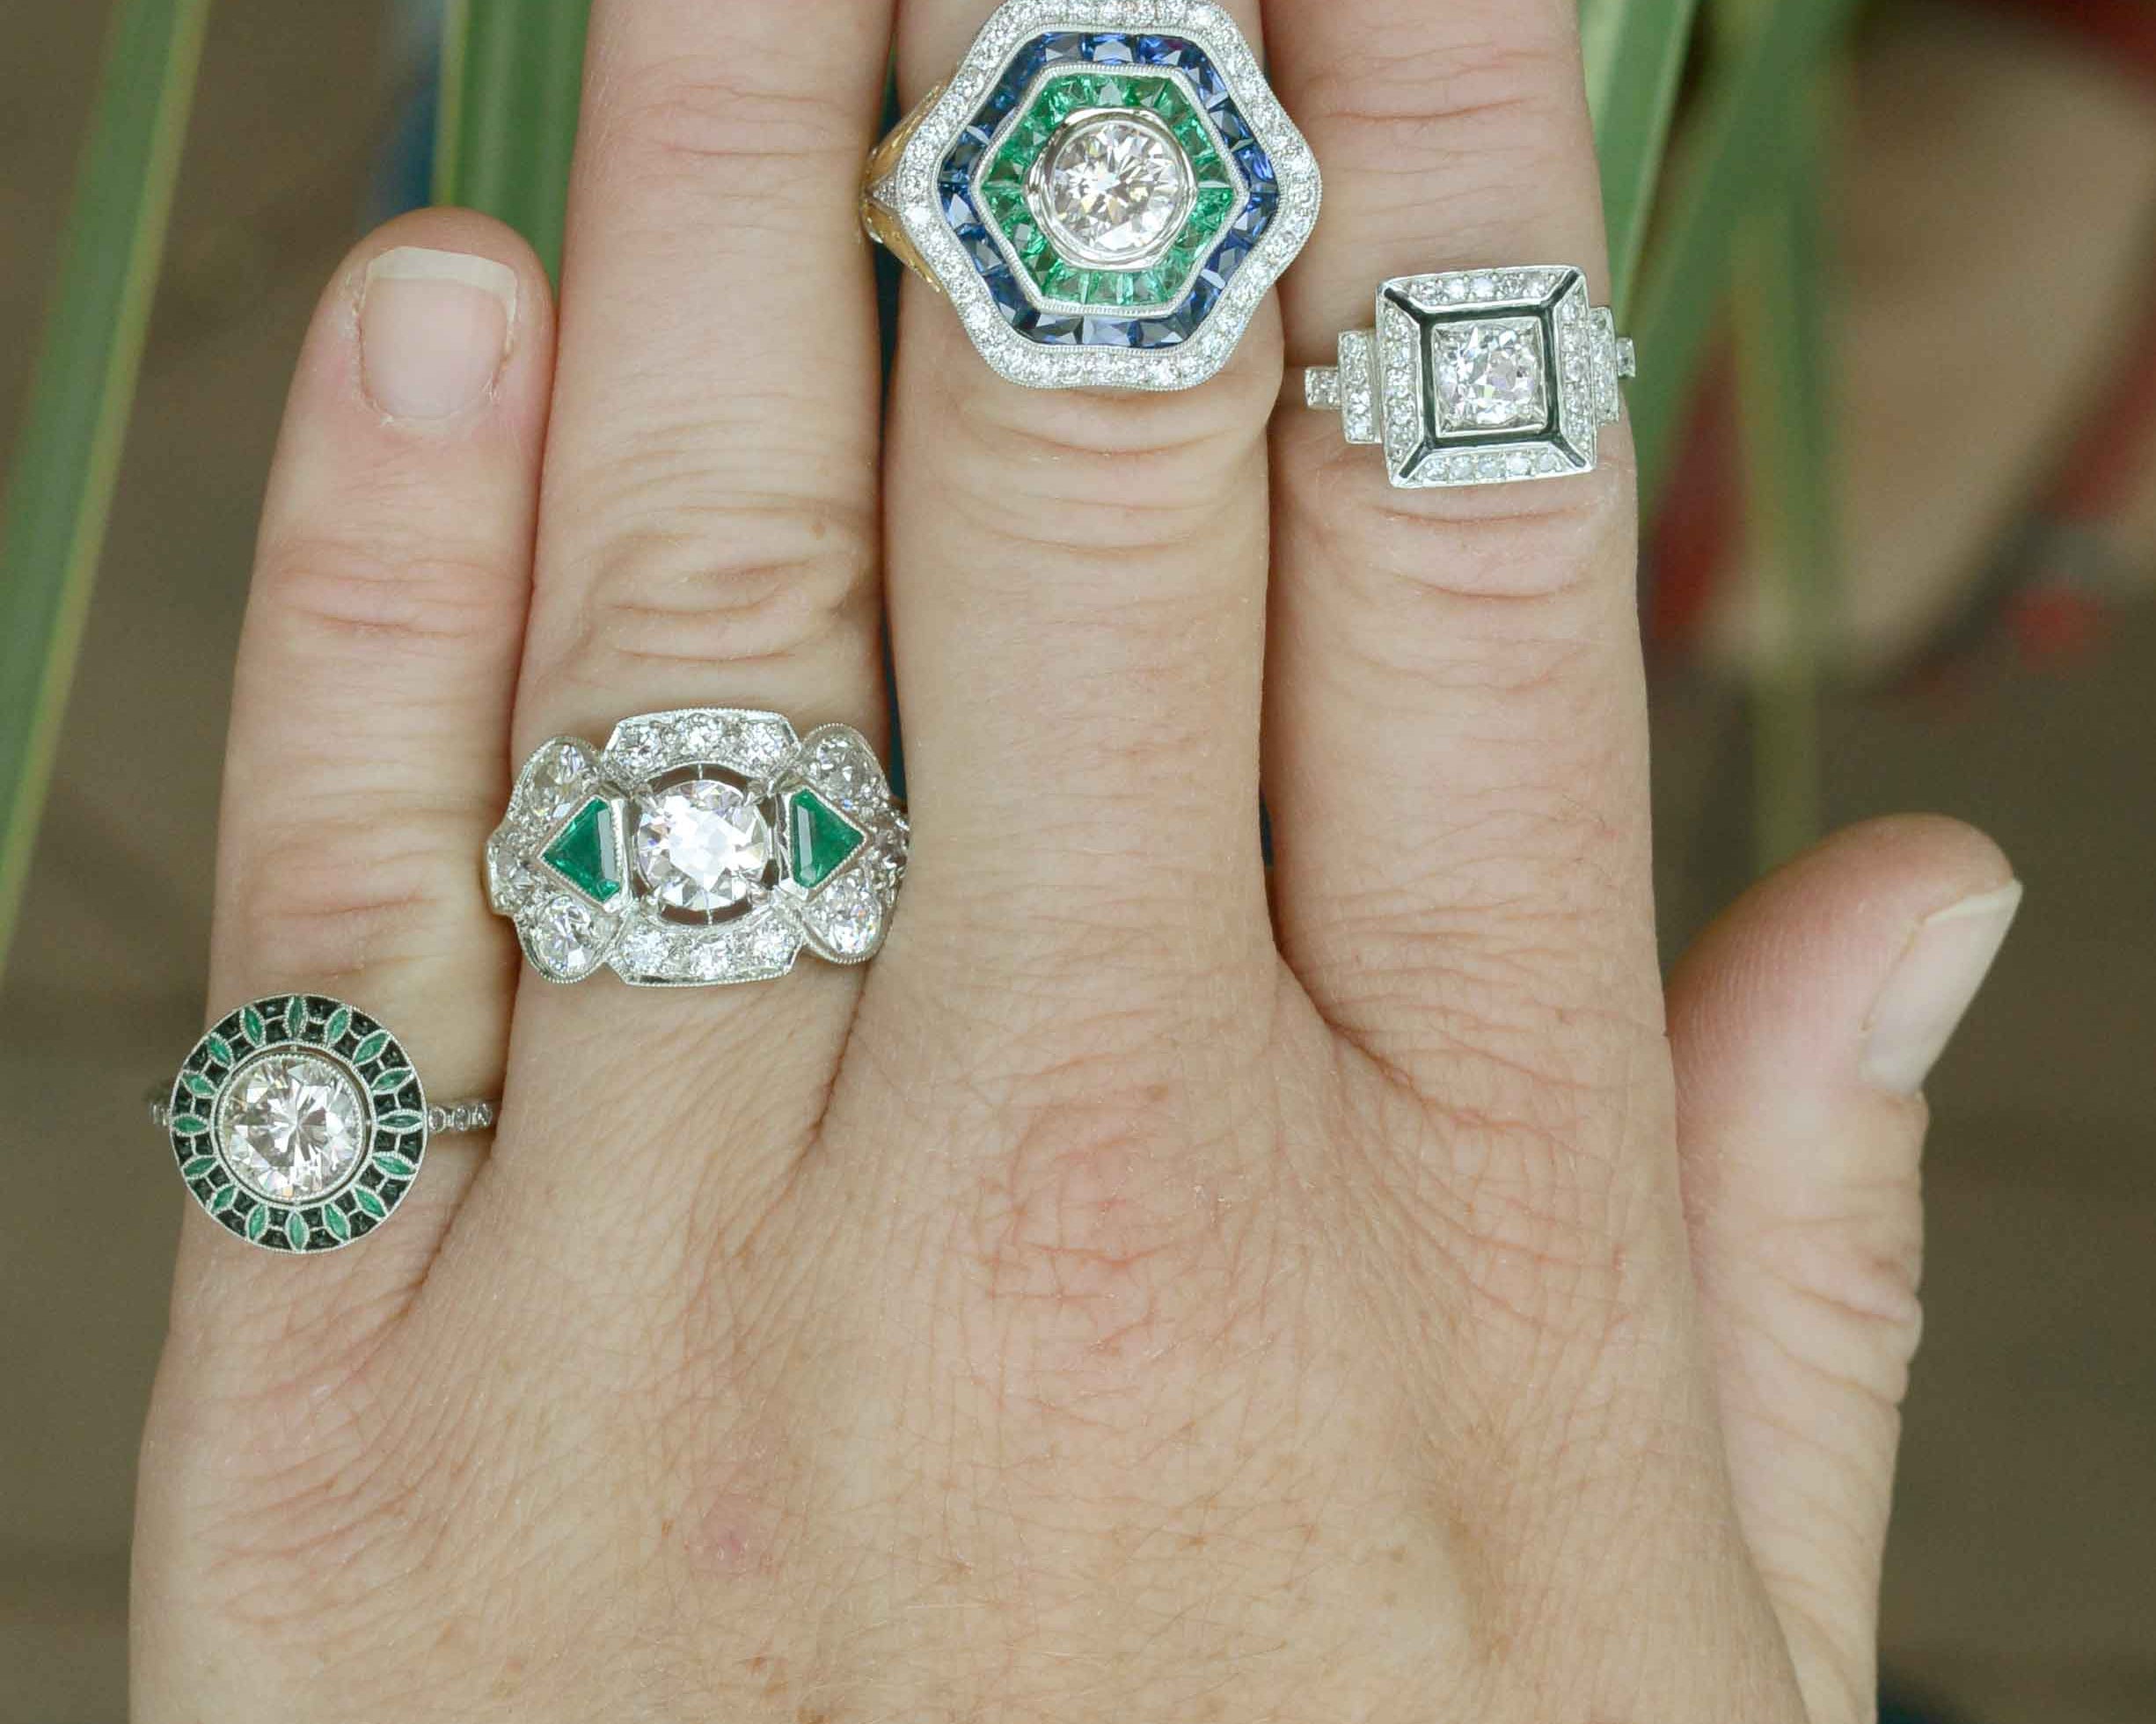 Diamond engagement rings with emeralds.